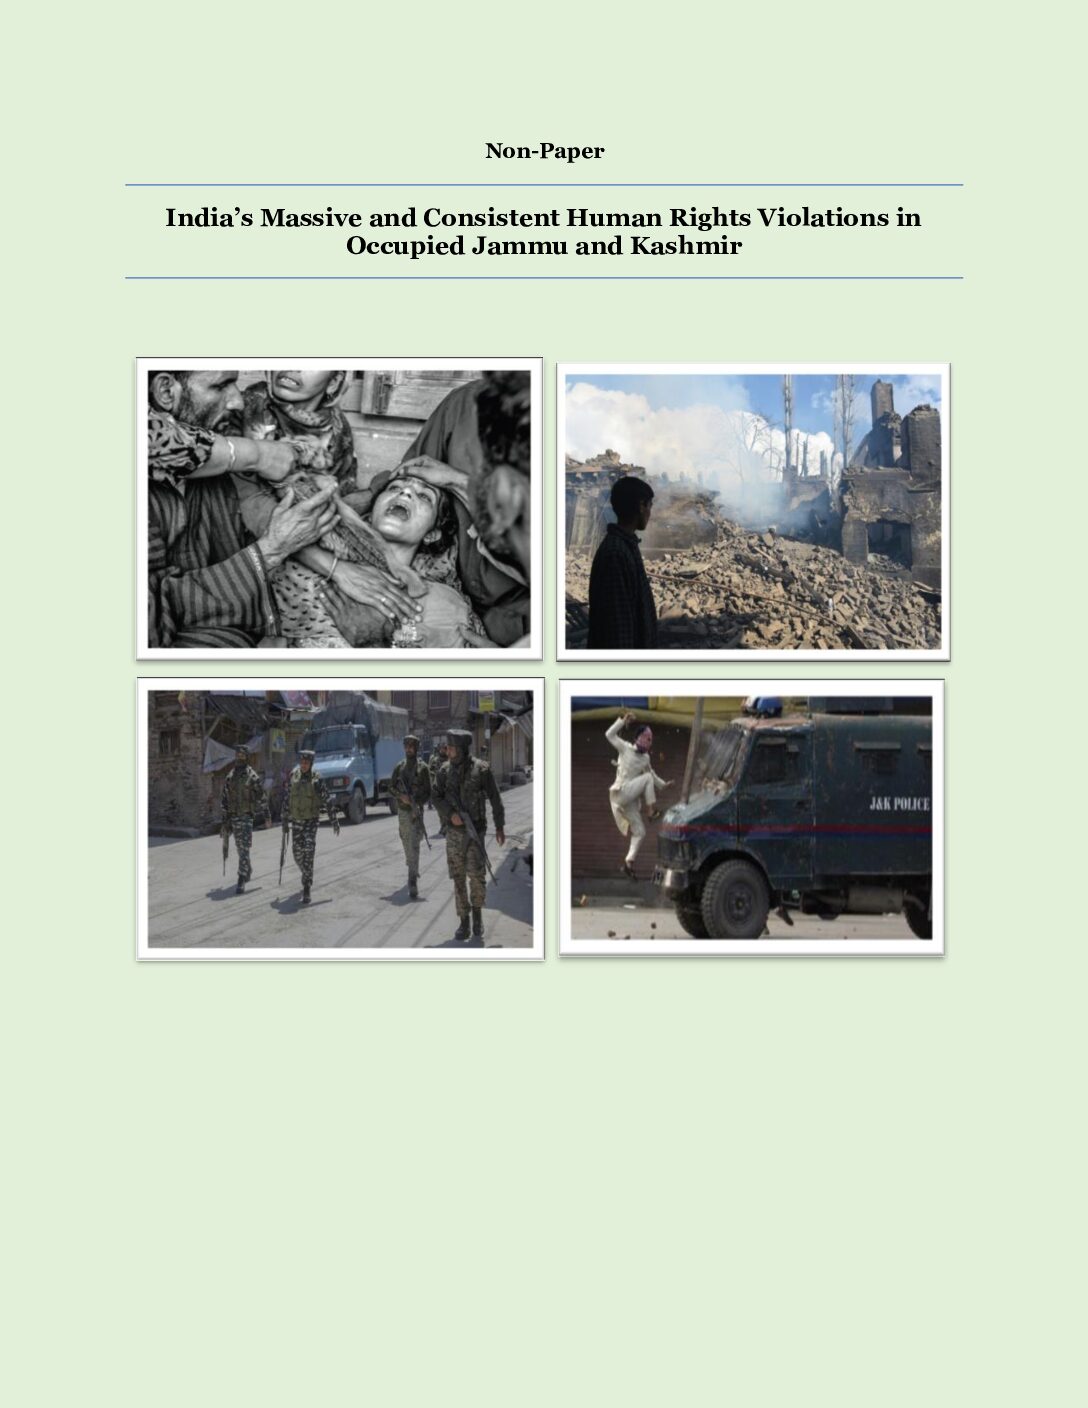 “Non-Paper on  India’s Massive and Consistent Human Rights Violations in the Indian Occupied Jammu and Kashmir (IOJ&K)”